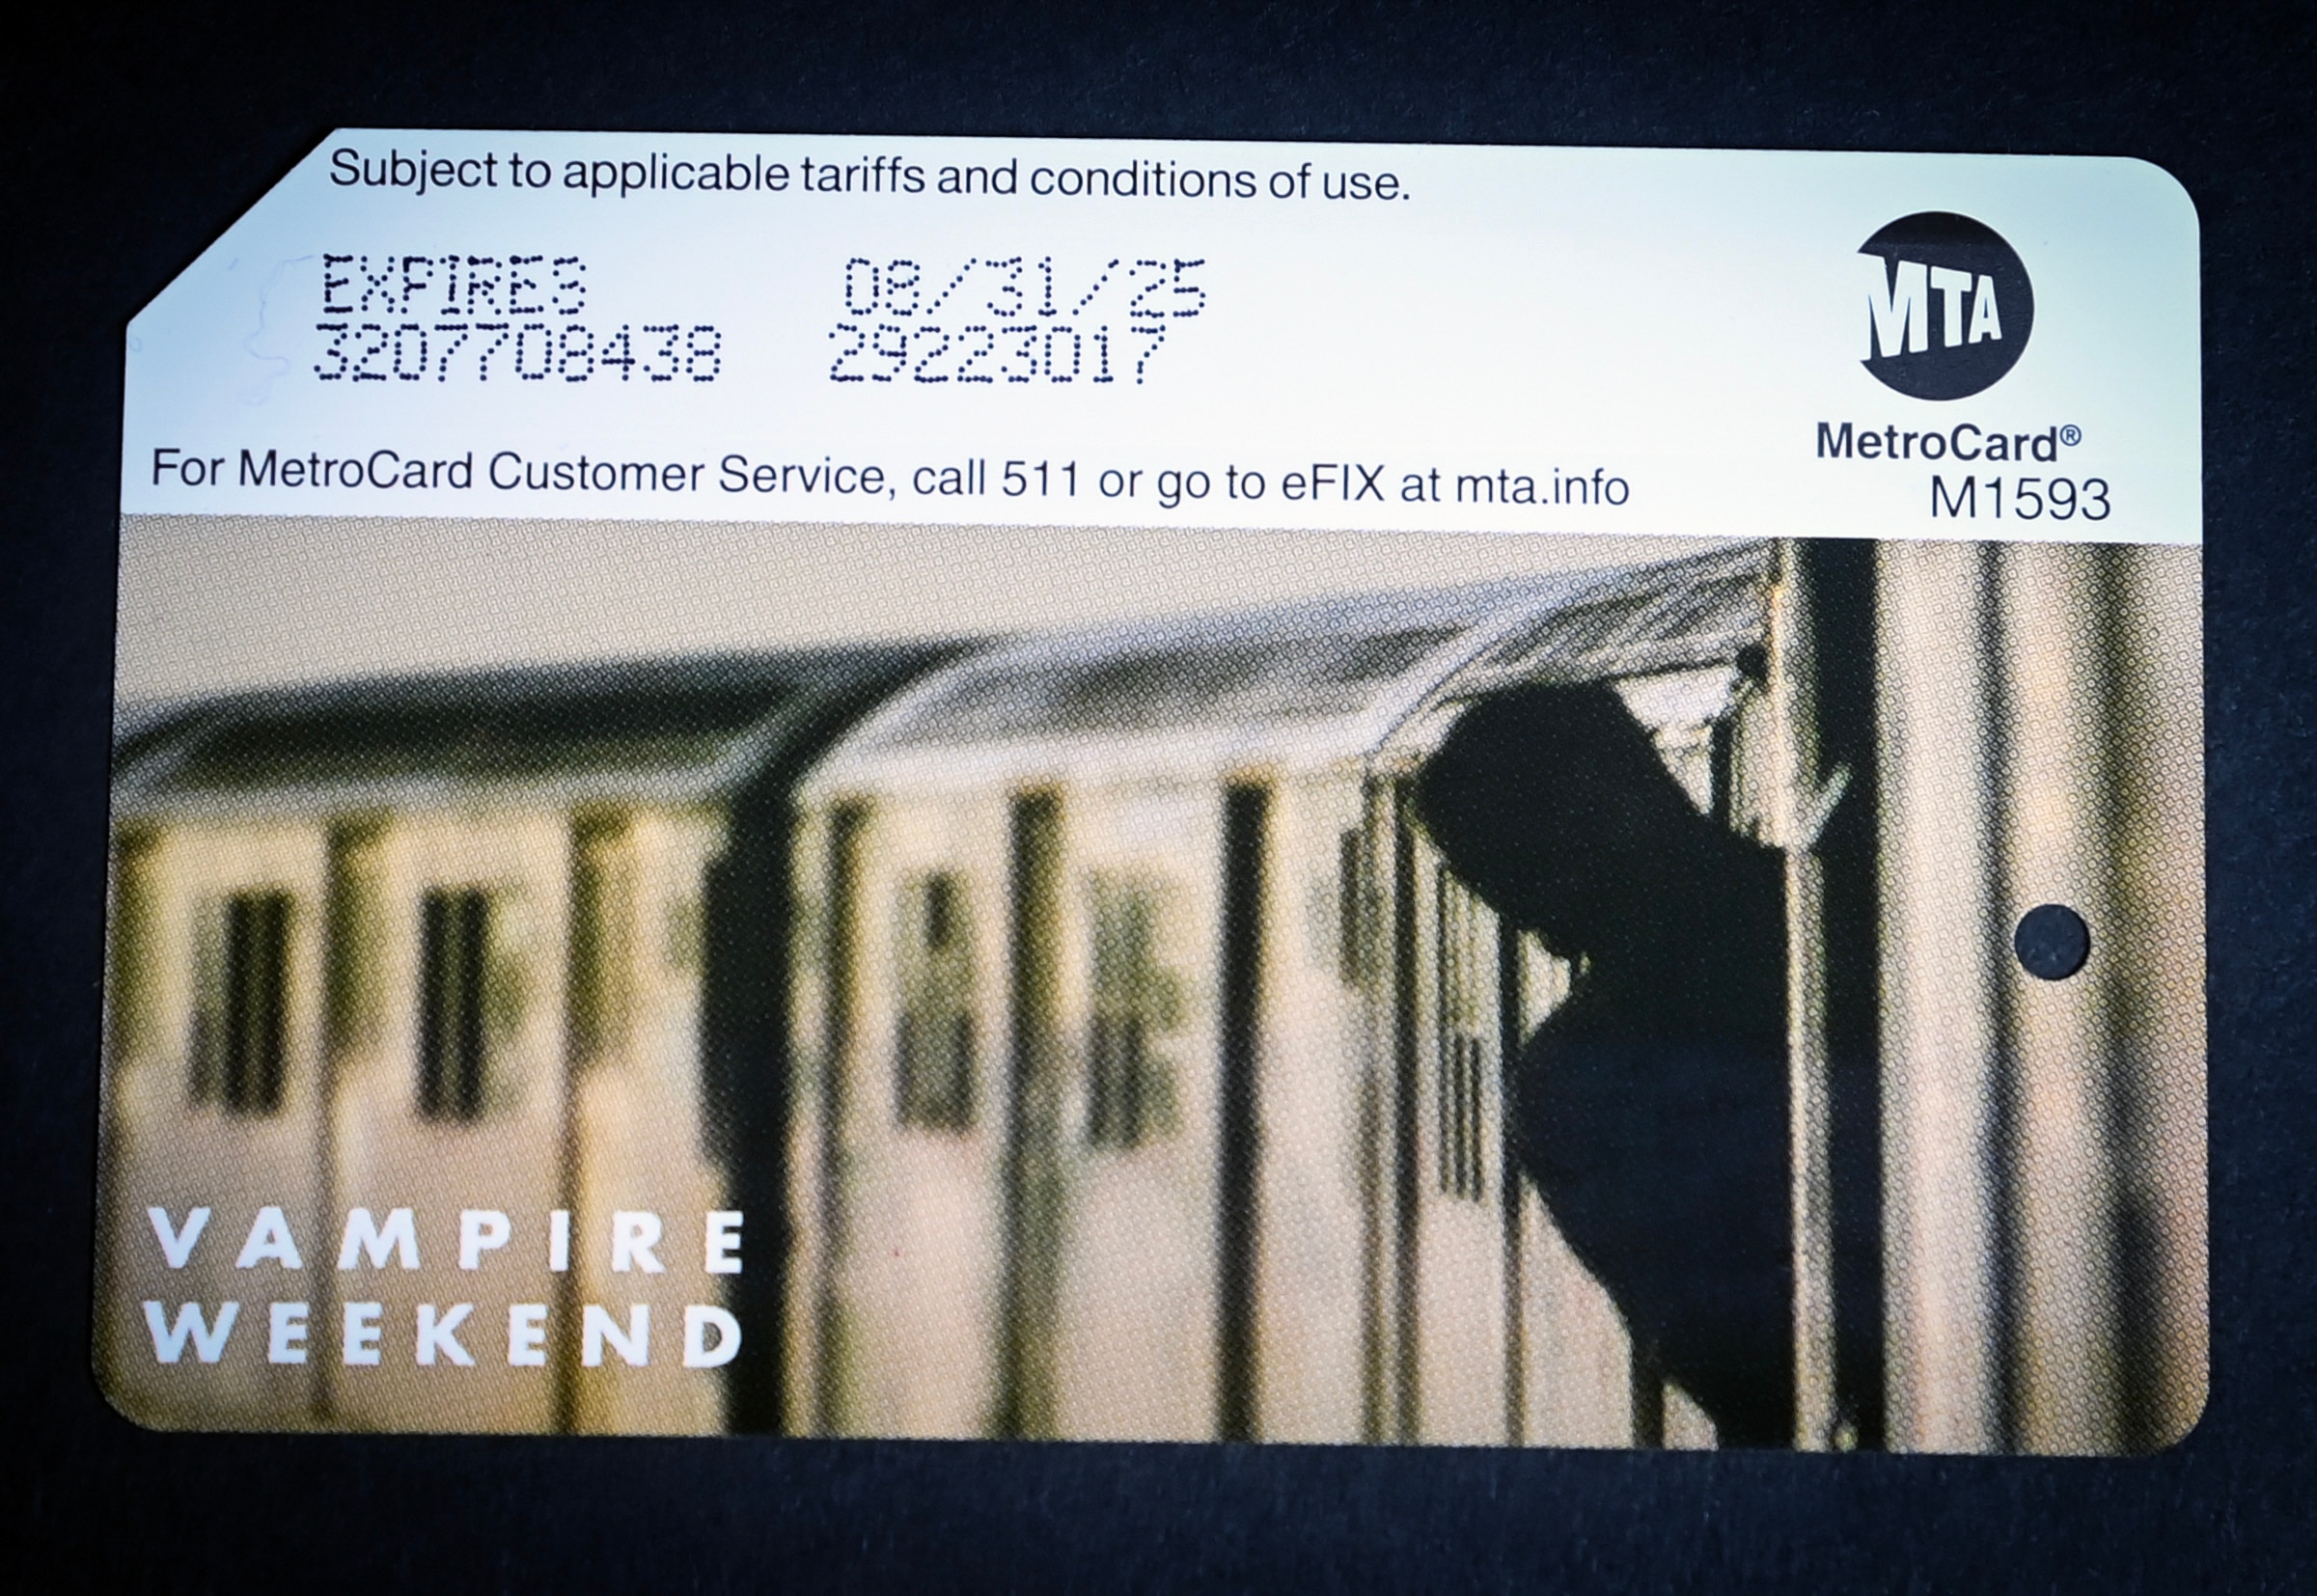 PHOTOS: MTA Announces Commemorative MetroCards Featuring New York City Rock Band Vampire Weekend